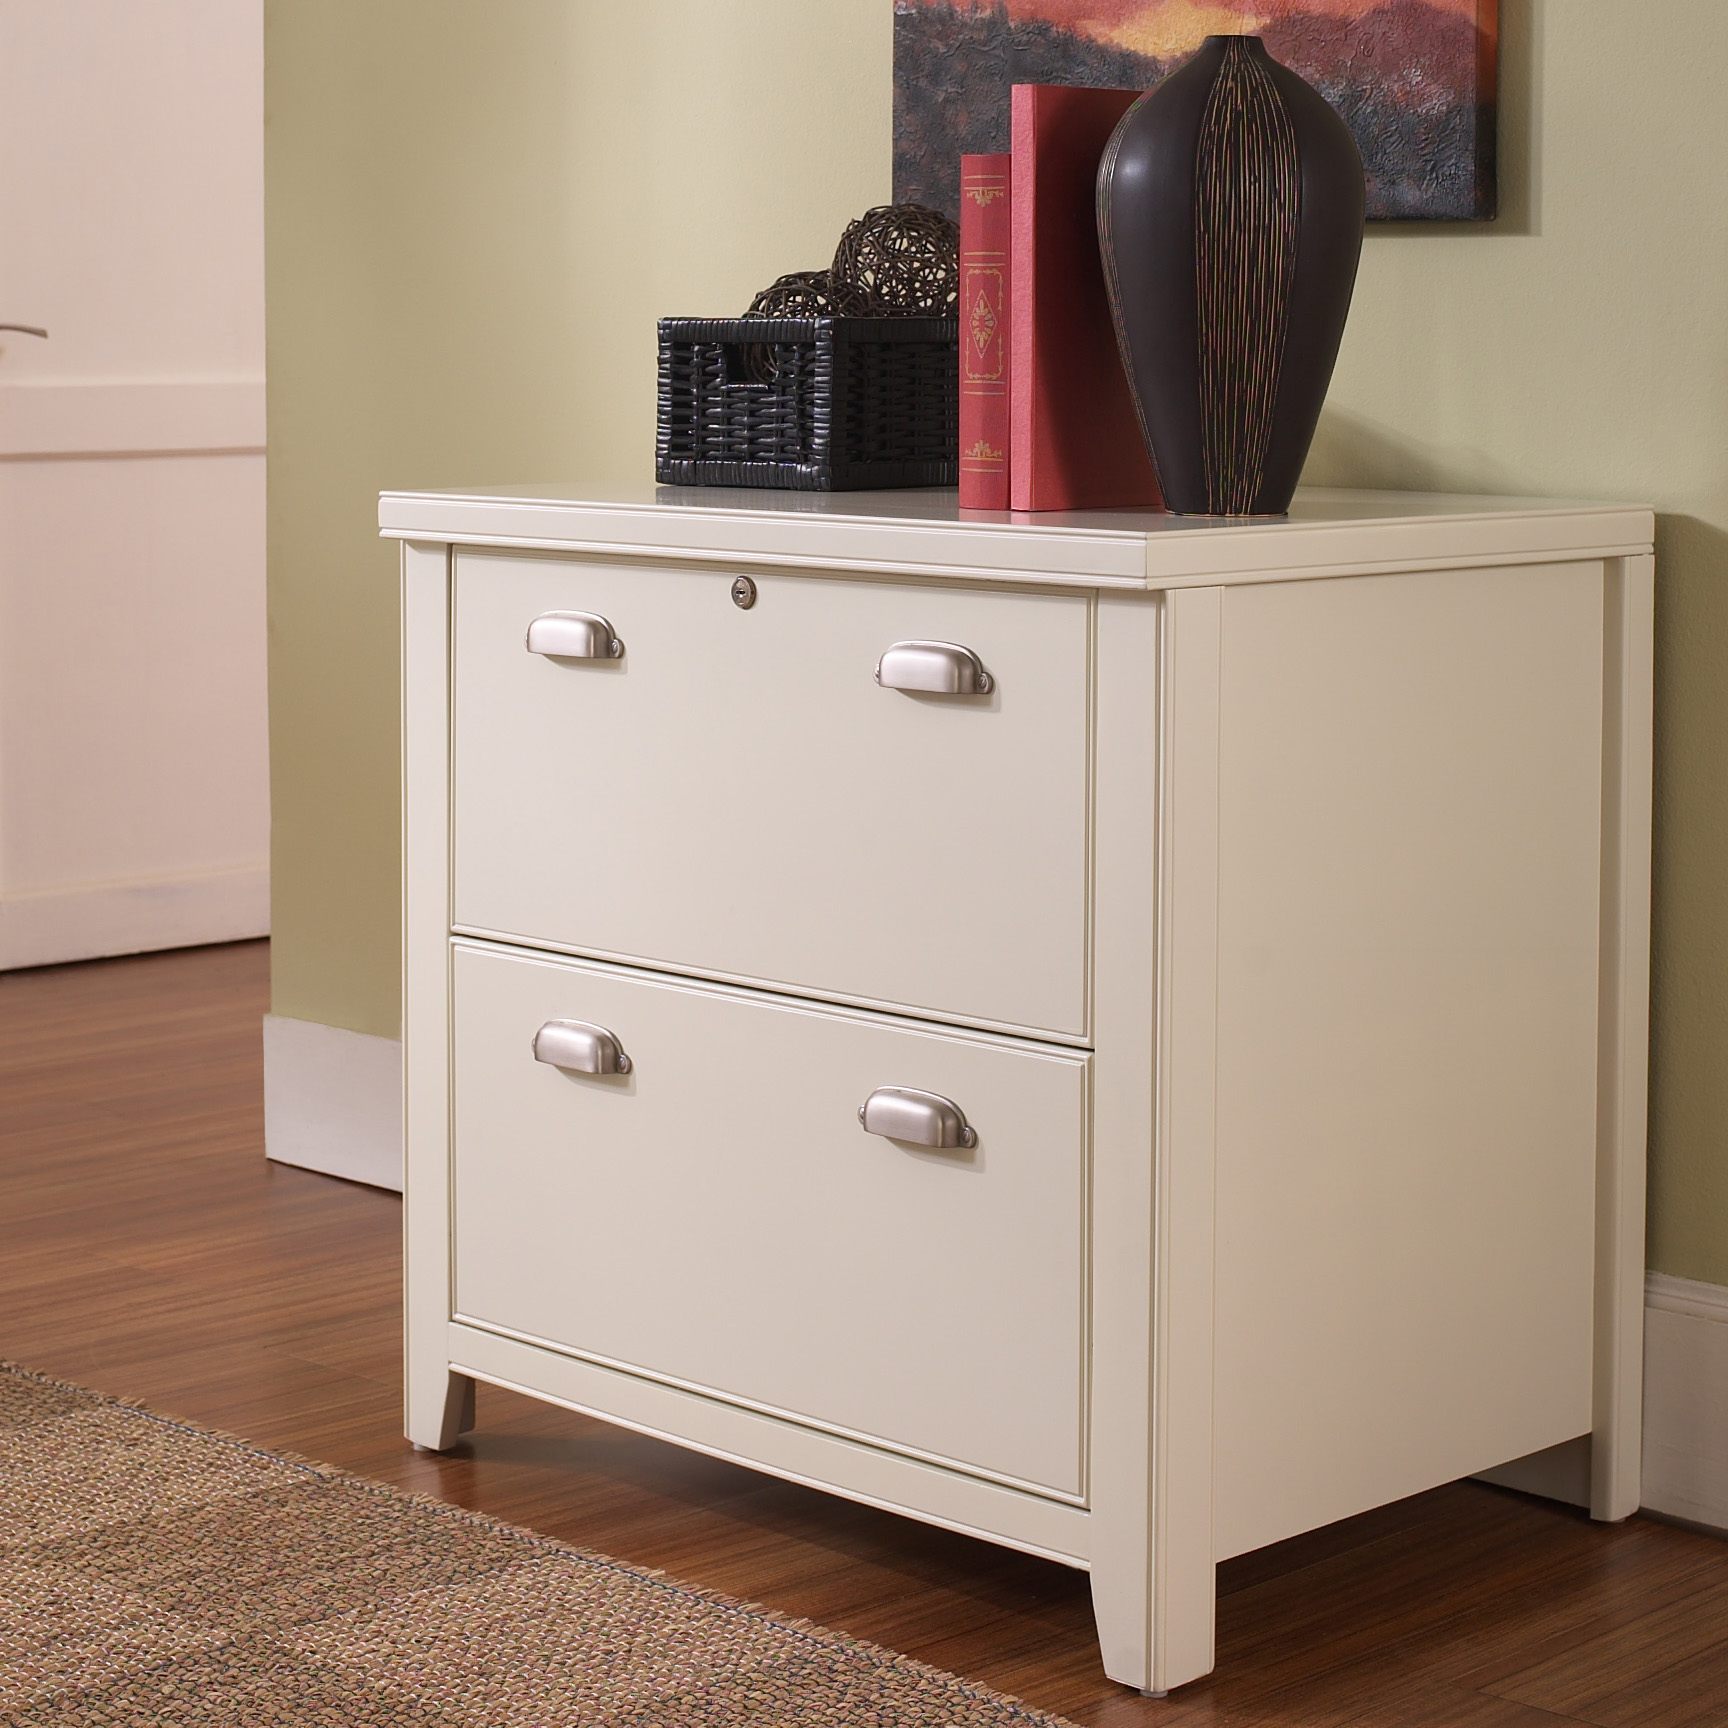 Tribeca Loft 2 Drawer Lateral File